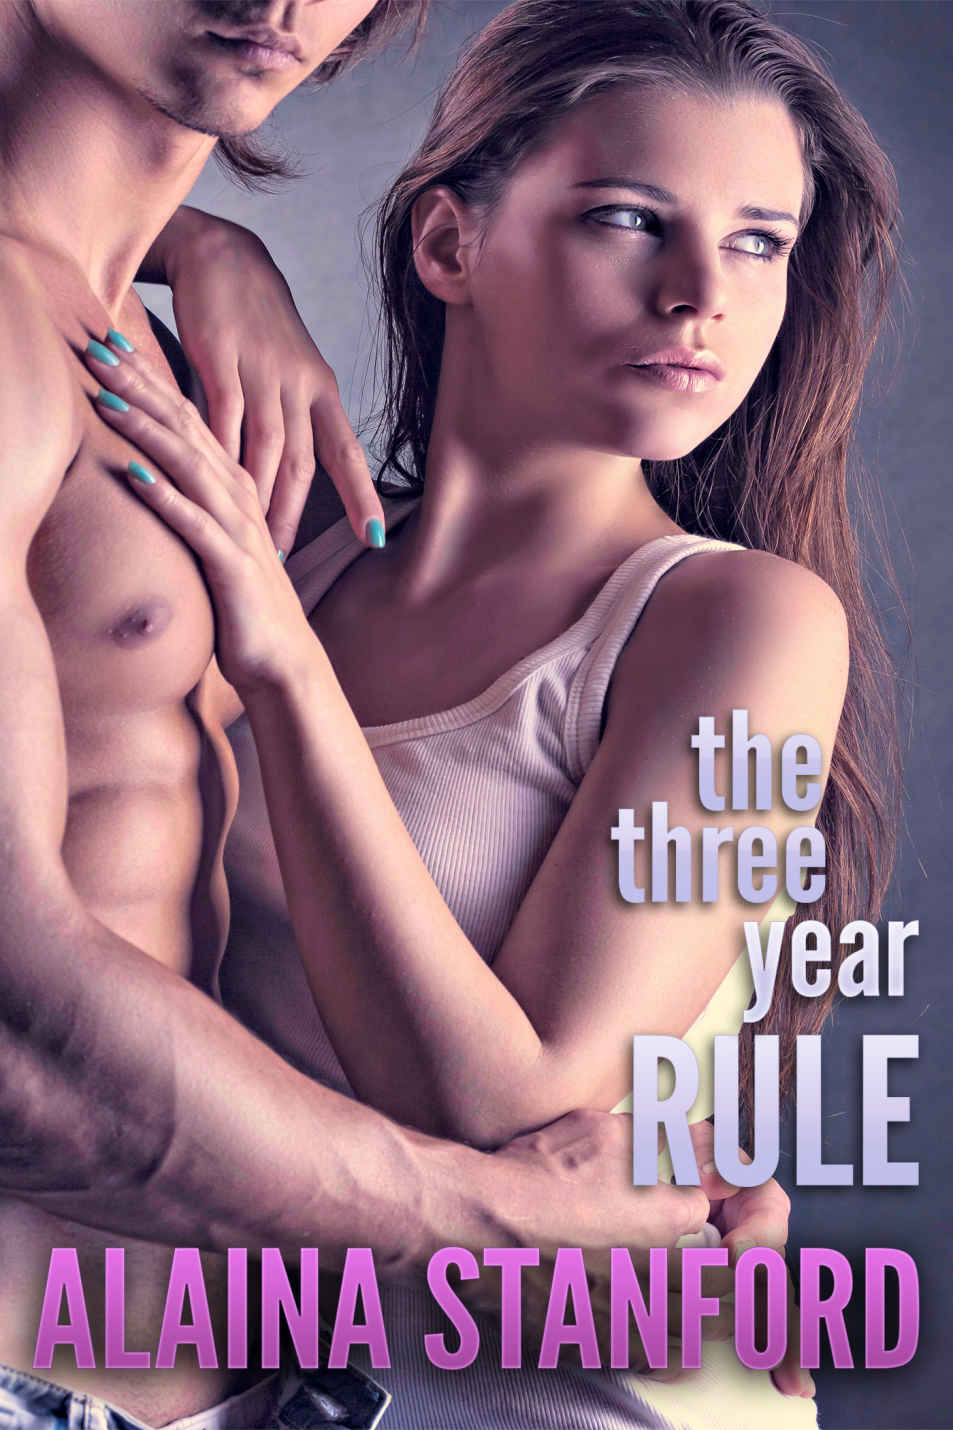 Three Year Rule (The Rule Series Book 1) by Alaina Stanford